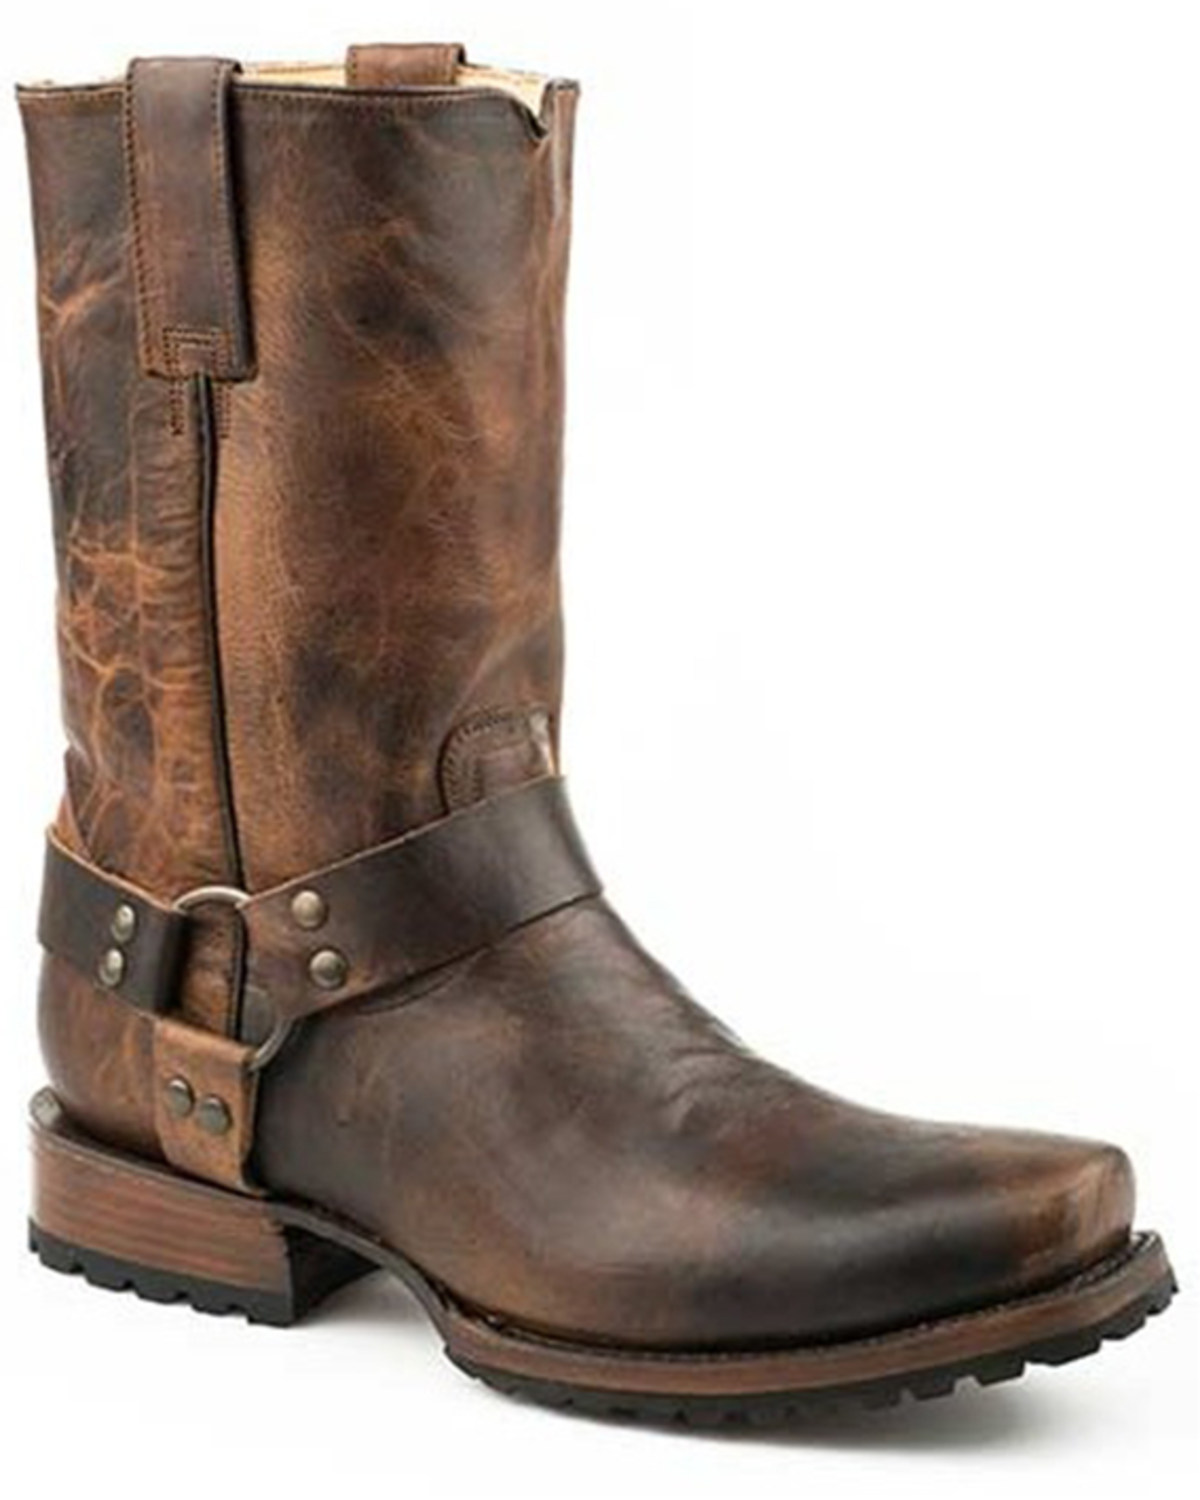 Stetson Men's Heritage Harness Waxy Shaft Pull On Moto Boots - Square Toe